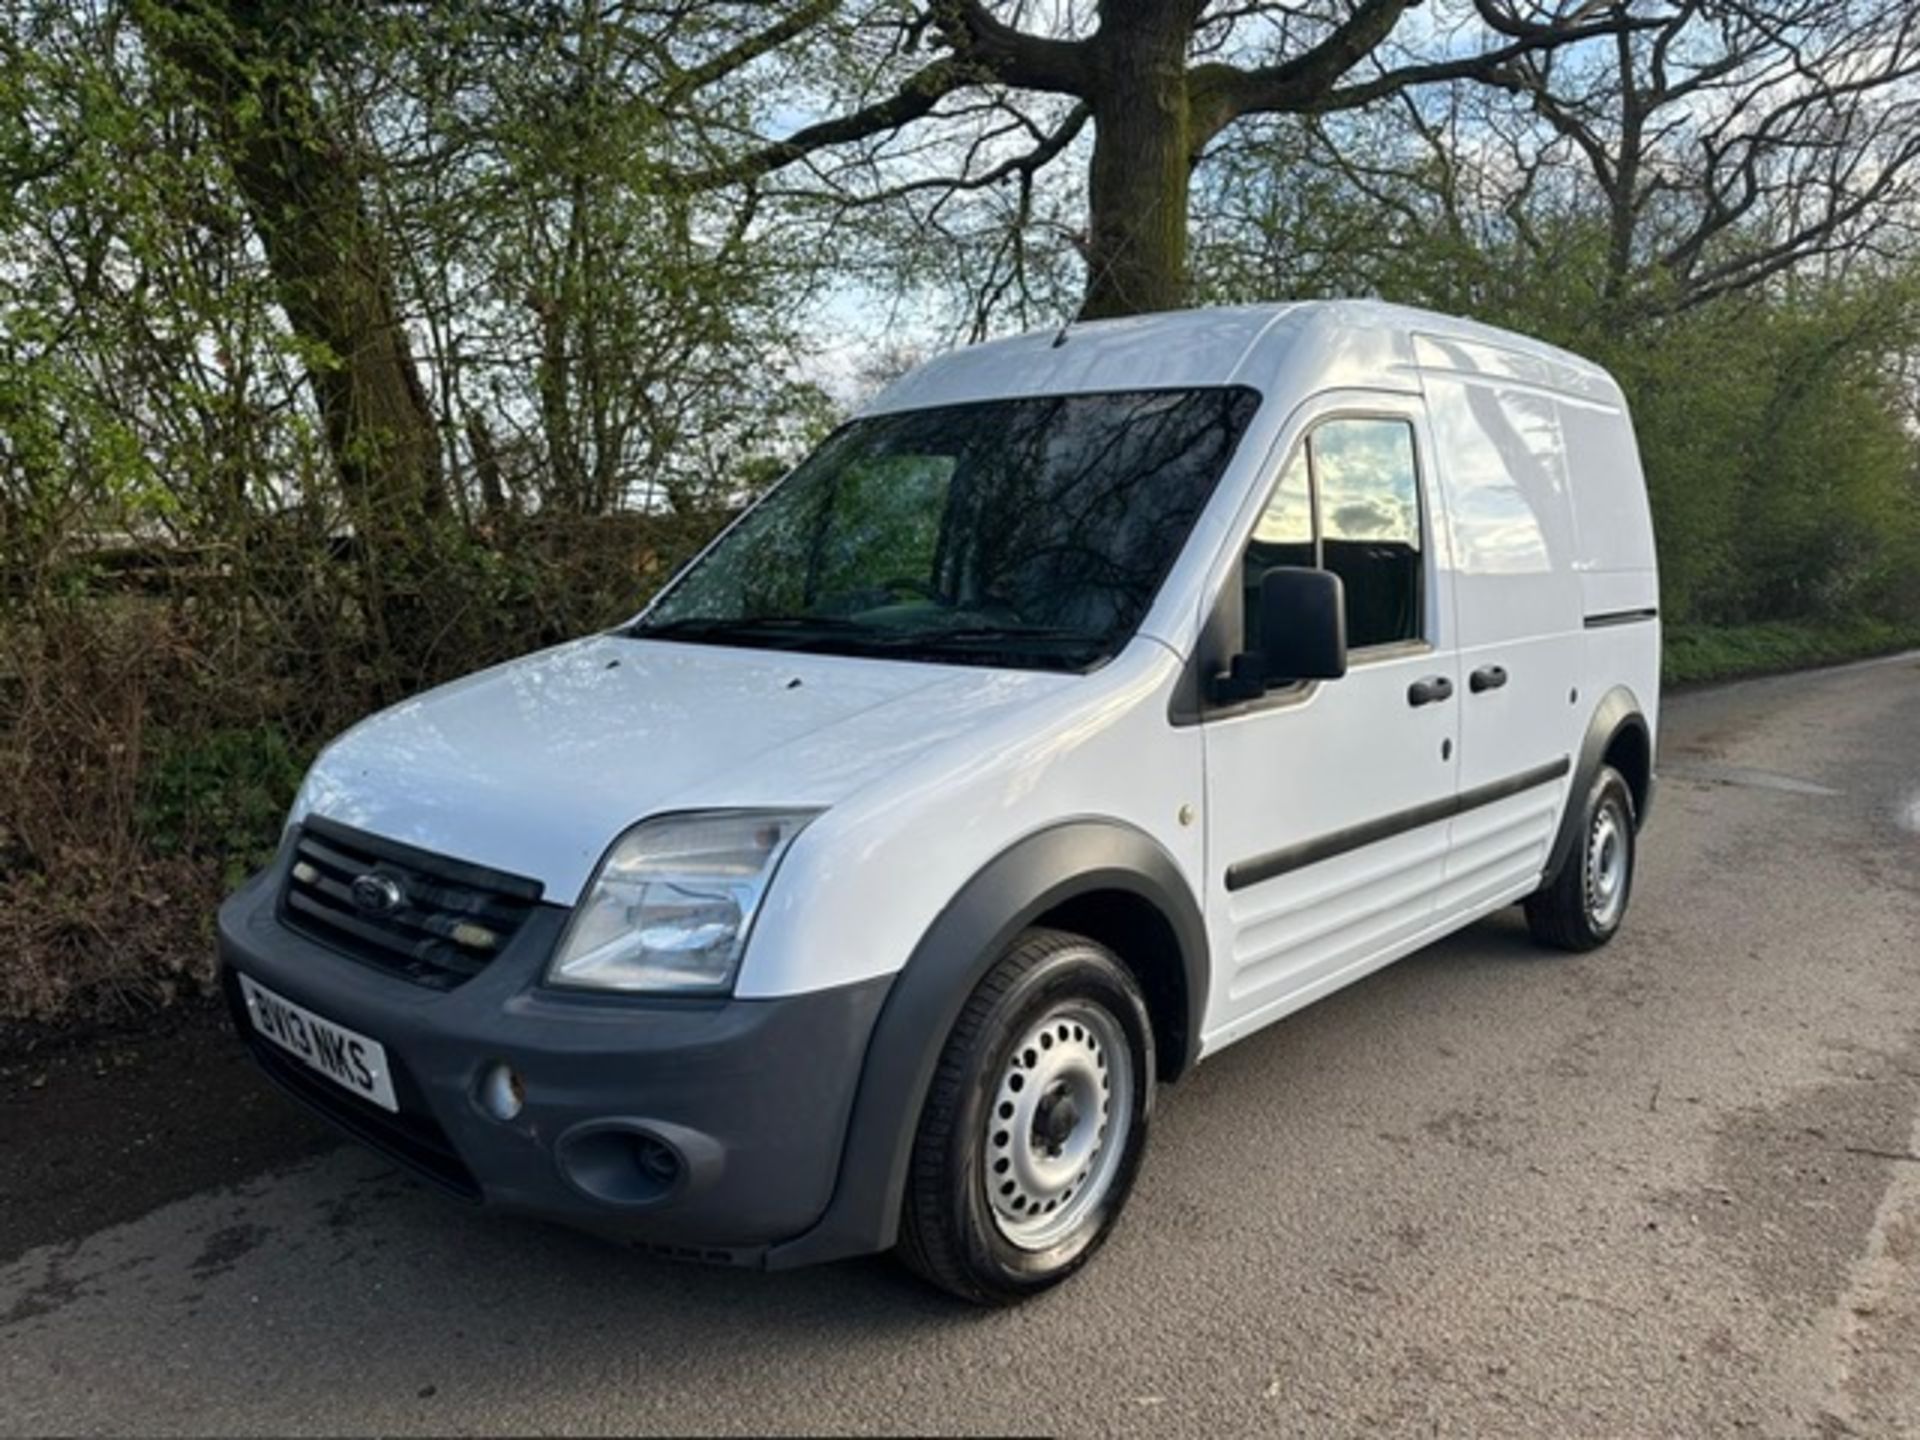 FORD TRANSIT CONNECT PANEL VAN REG:BV13 NKS 1.8LITRE. HIGH ROOF LWB. 83K REC MILES APPROX. WITH V5 A - Image 9 of 26